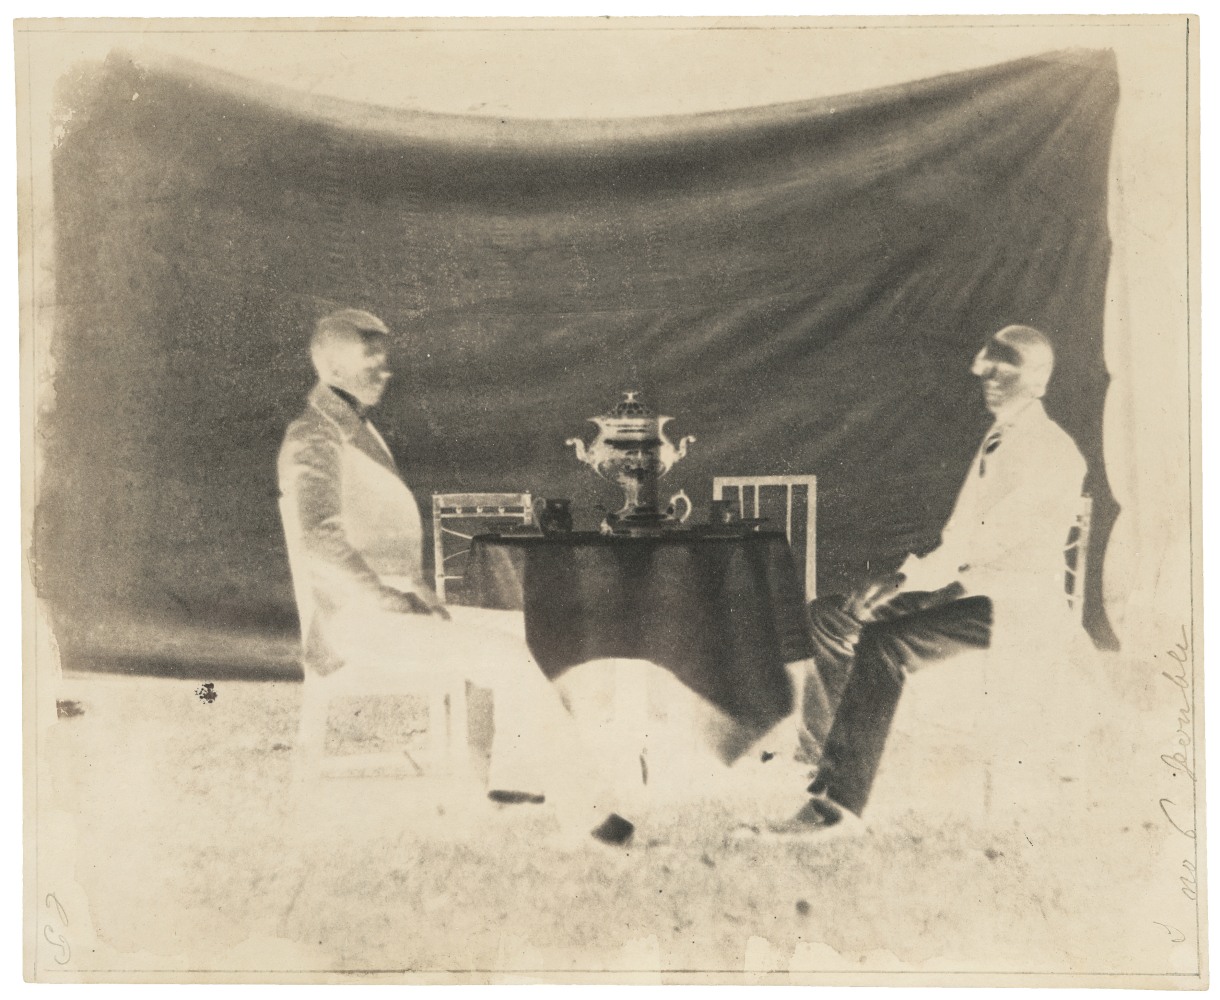 William Henry Fox TALBOT (English, 1800-1877) Charles Porter and another man, circa 1843 Calotype negative 18.8 x 22.9 cm Ruled at edges, inscribed &quot;C.P.&quot; and &quot;n. 6 Double&quot; in pencil